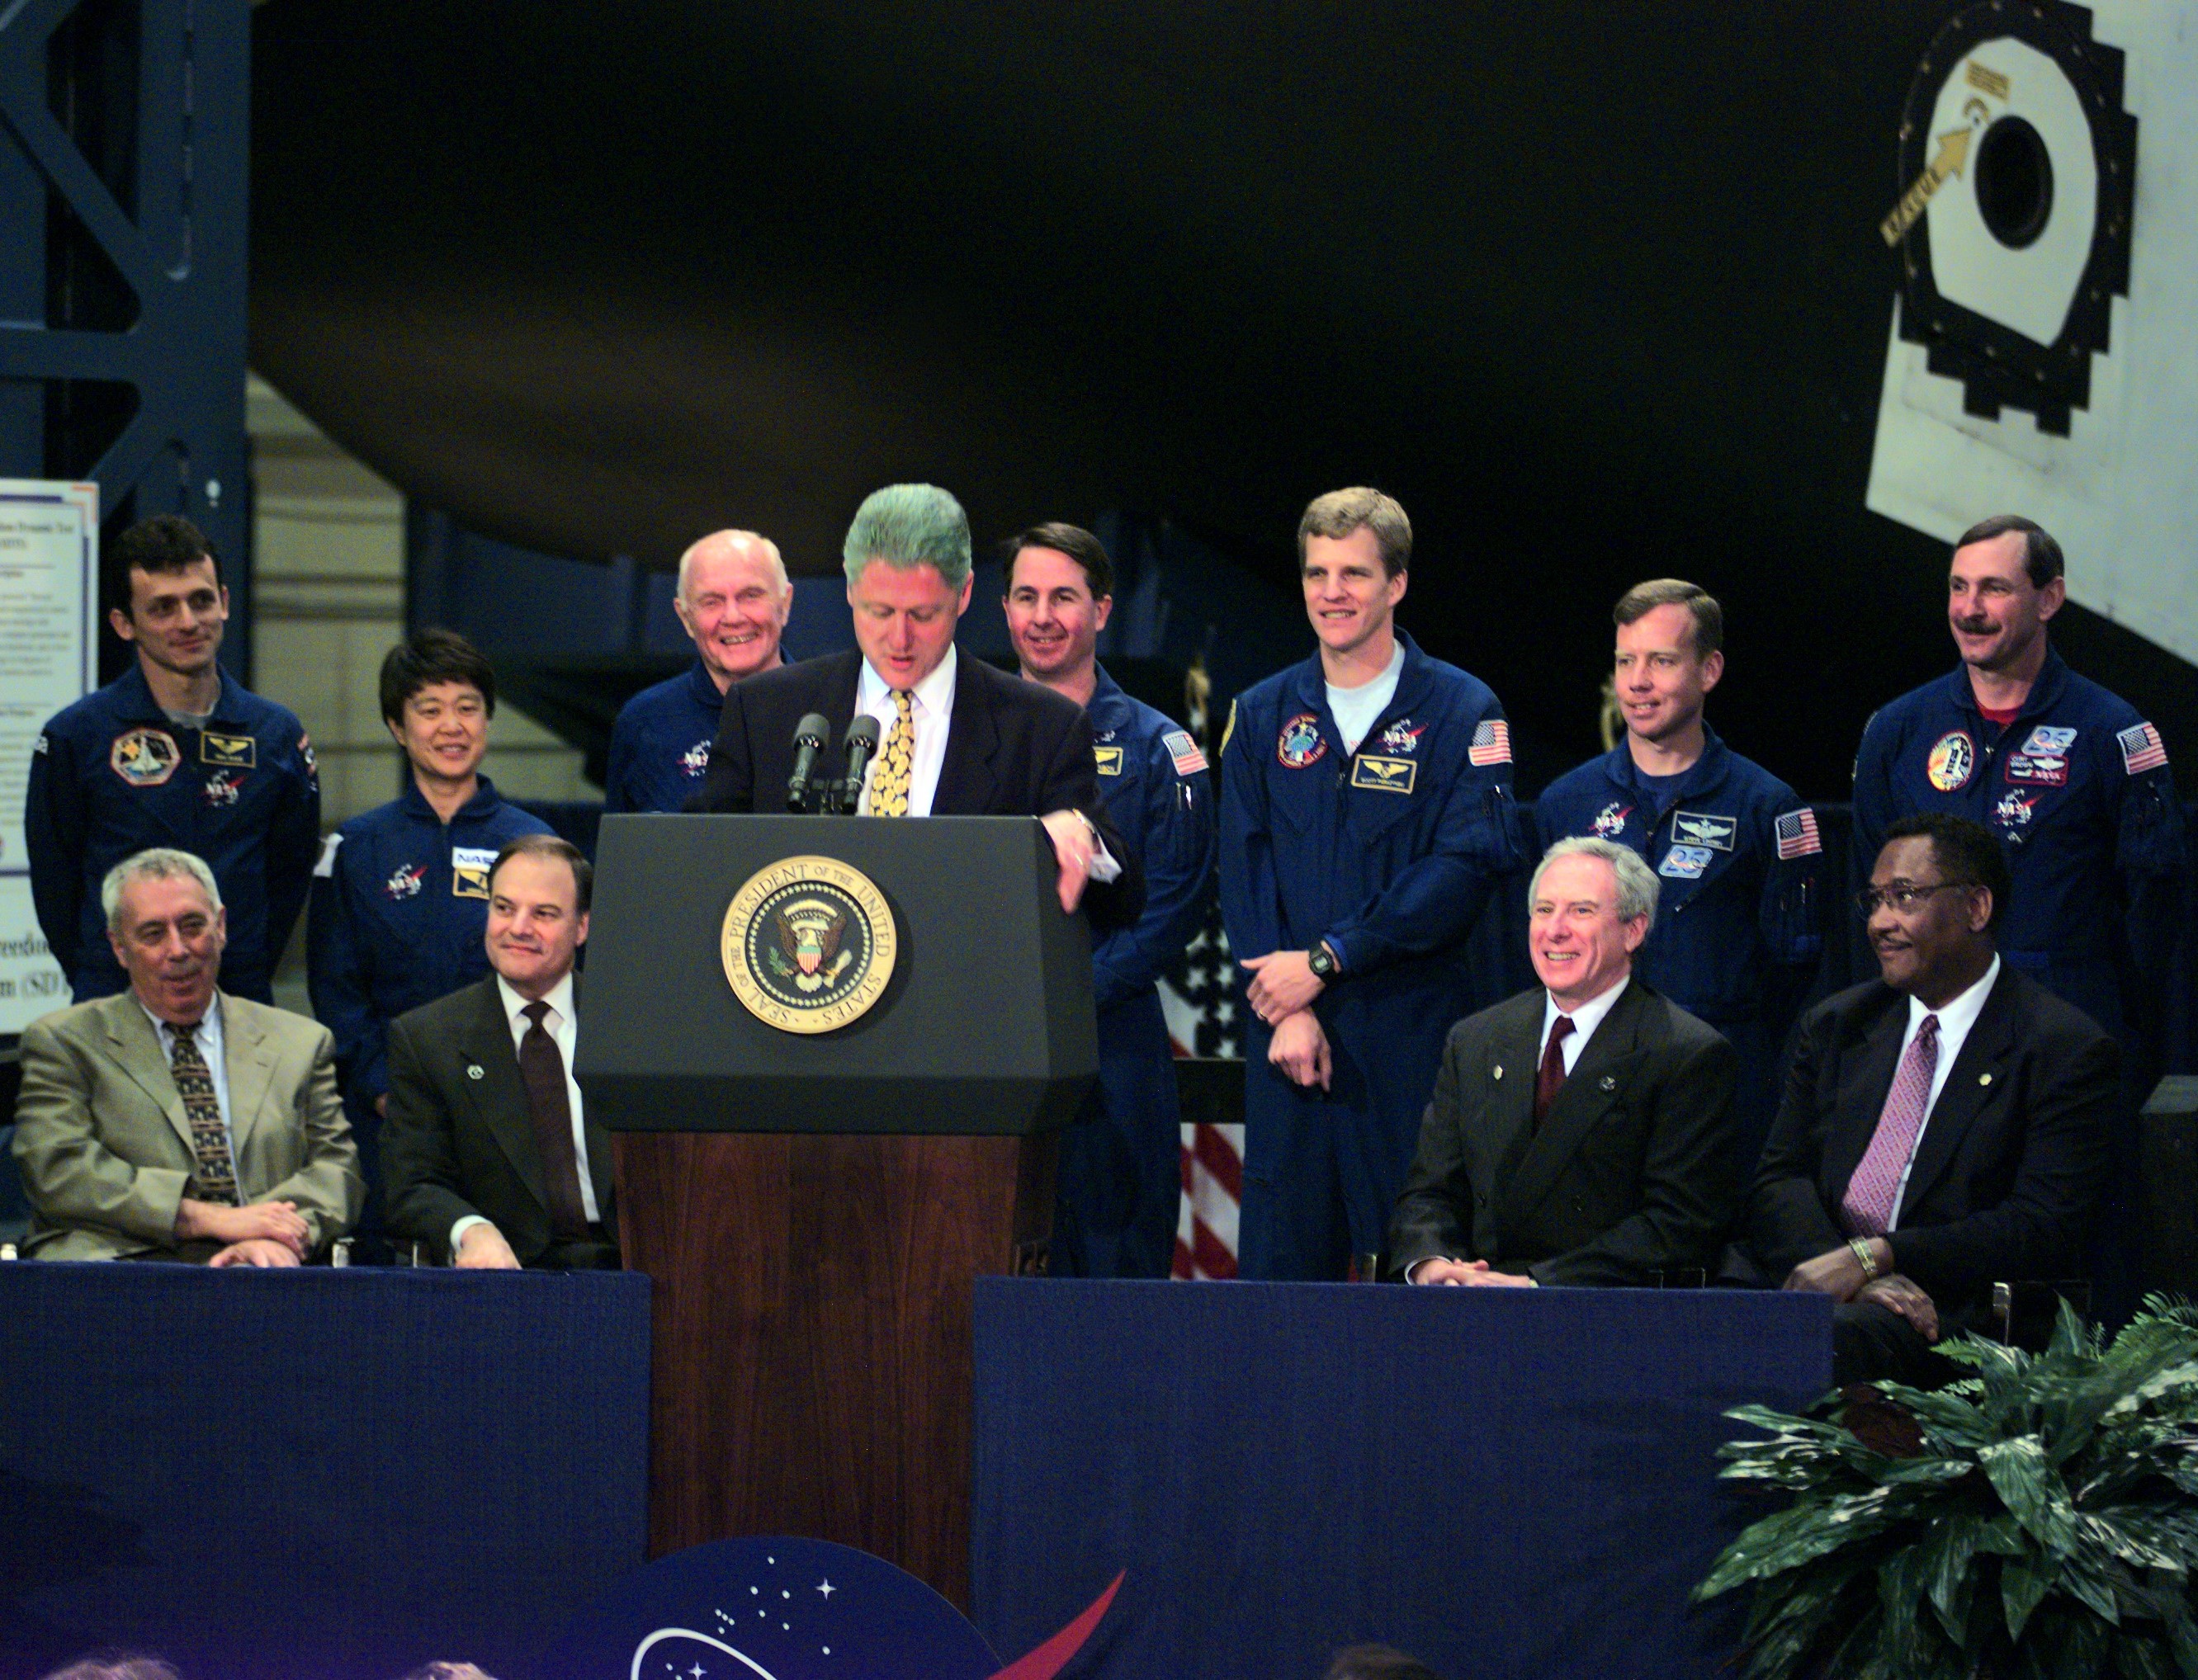 President William J. “Bill” Clinton introduces the STS-95 crew